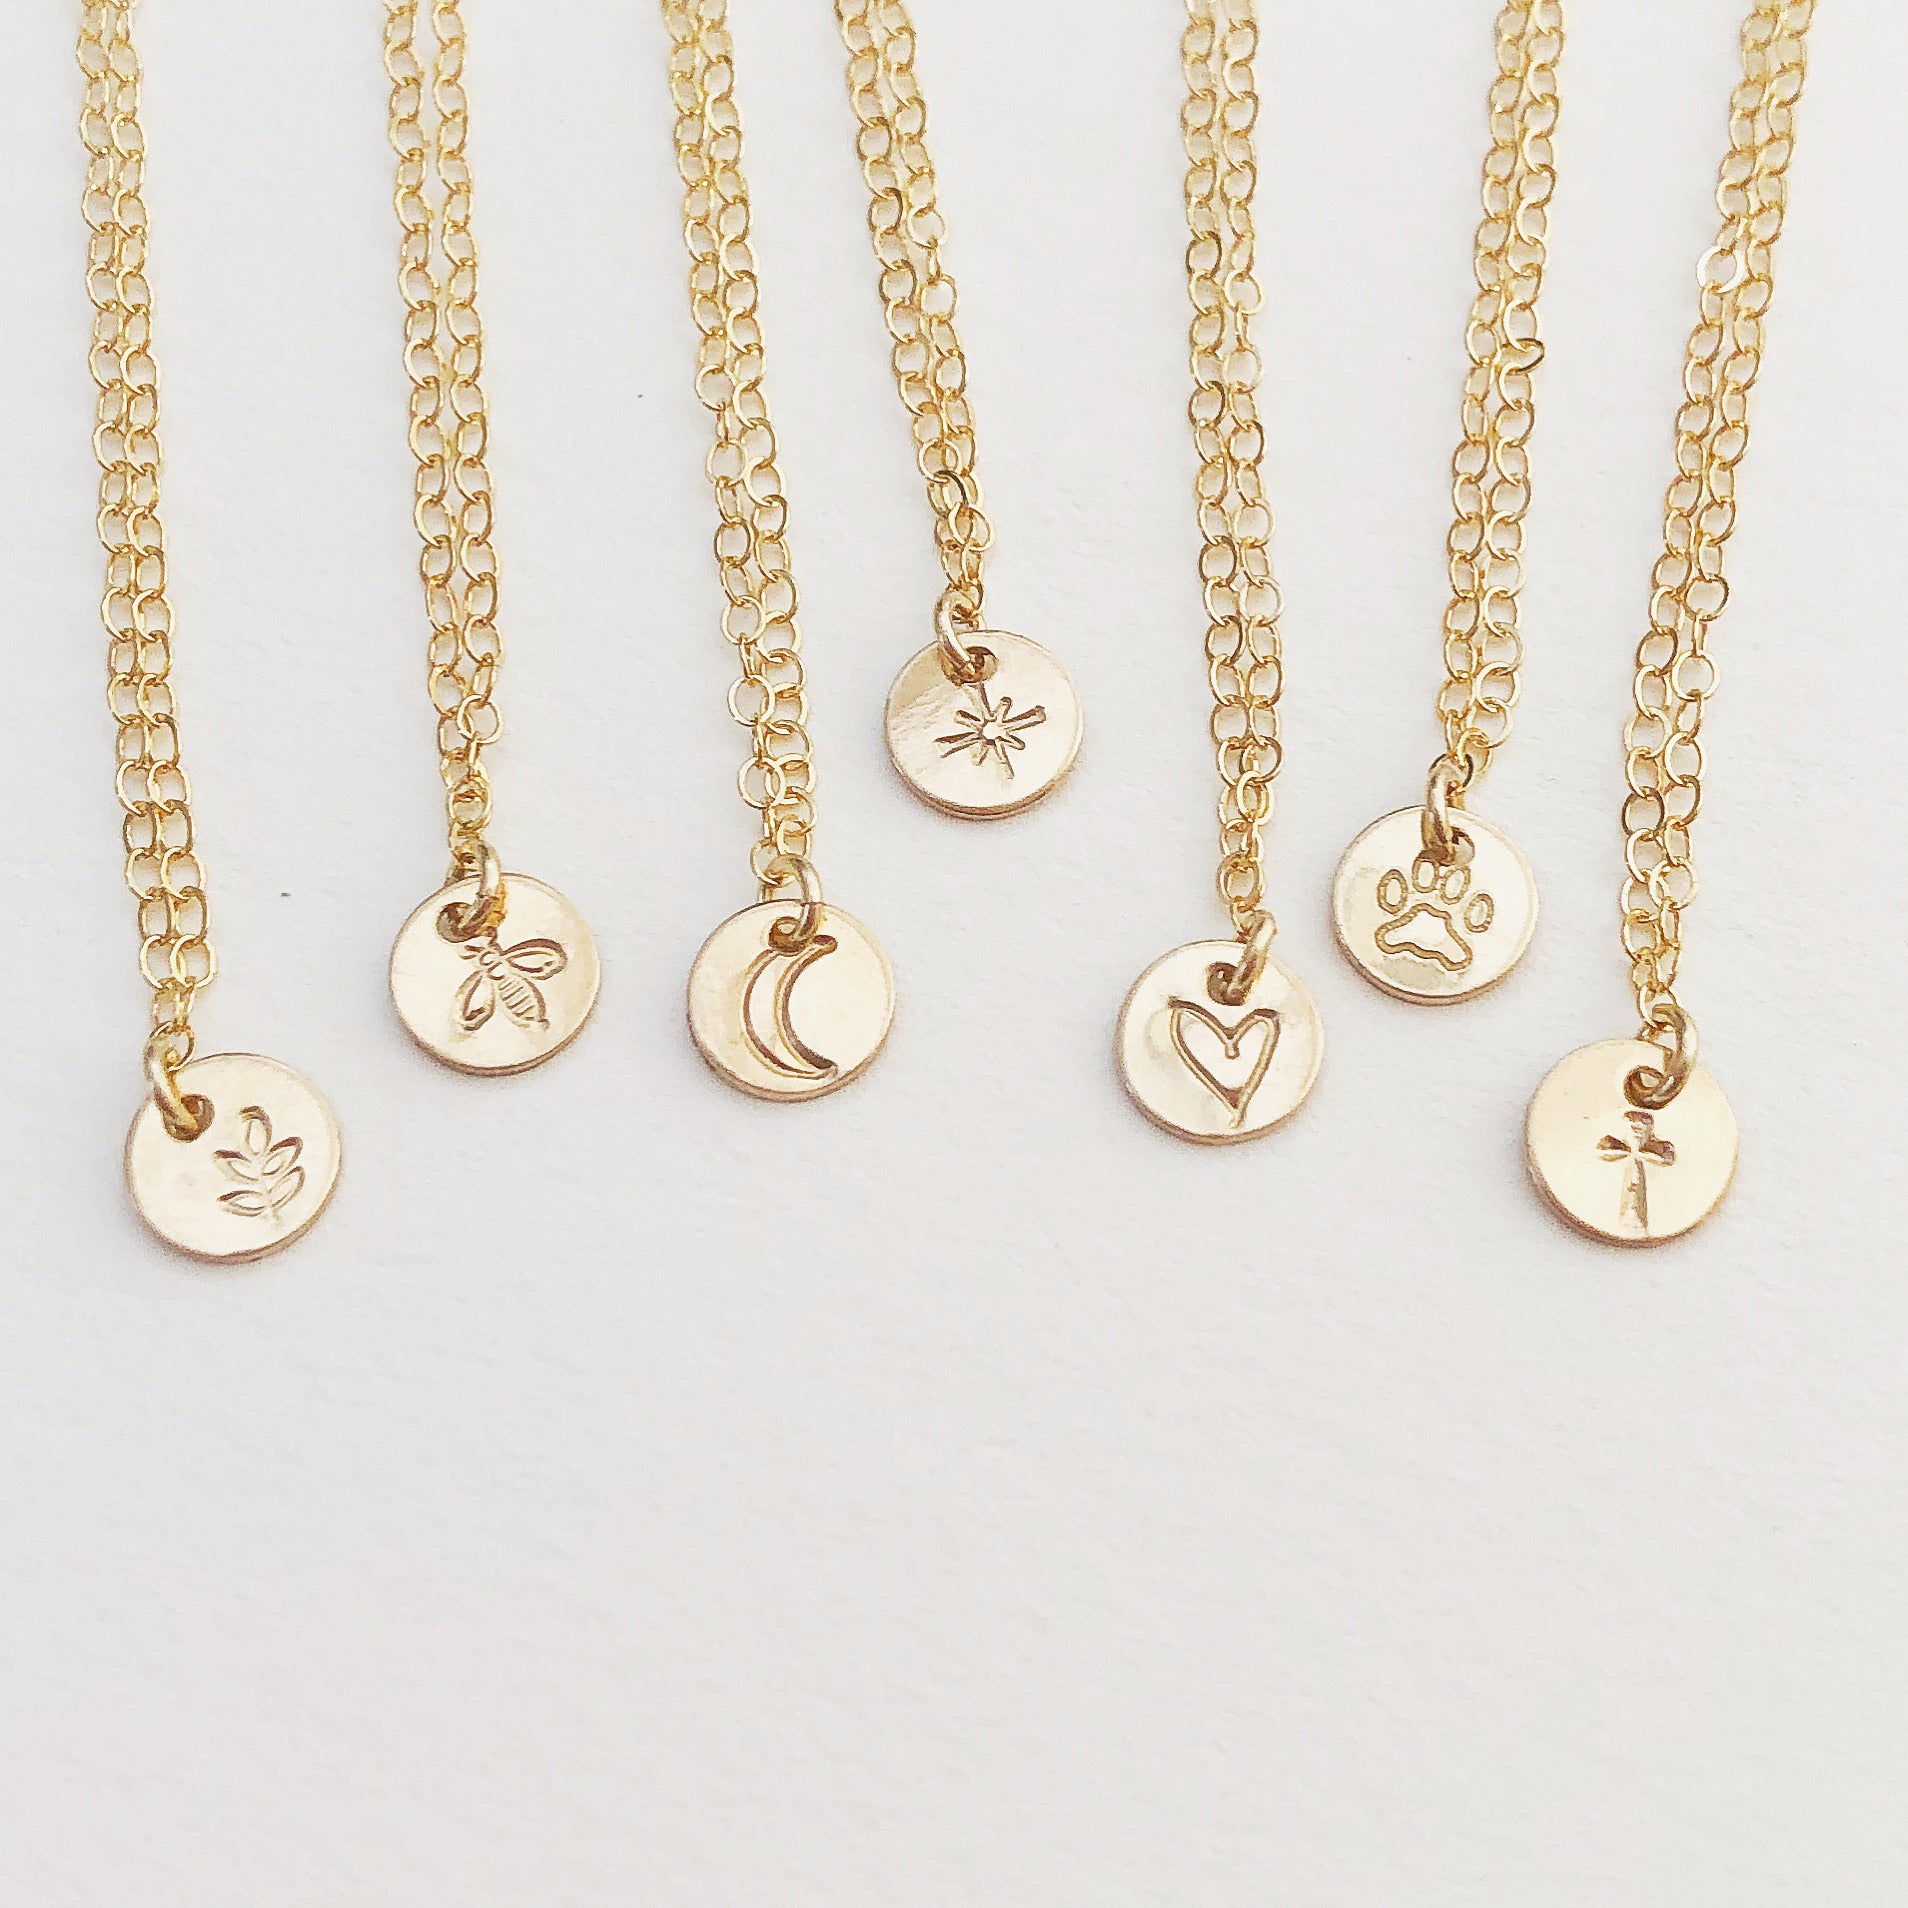 Personalized Jewelry, Personalized Gifts, Coin Necklace, Disc necklace Minimalist Jewelry, Everyday Jewelry, Graduation Gifts, Teachers Gift Ideas, Monogram and Name, Simple and Dainty